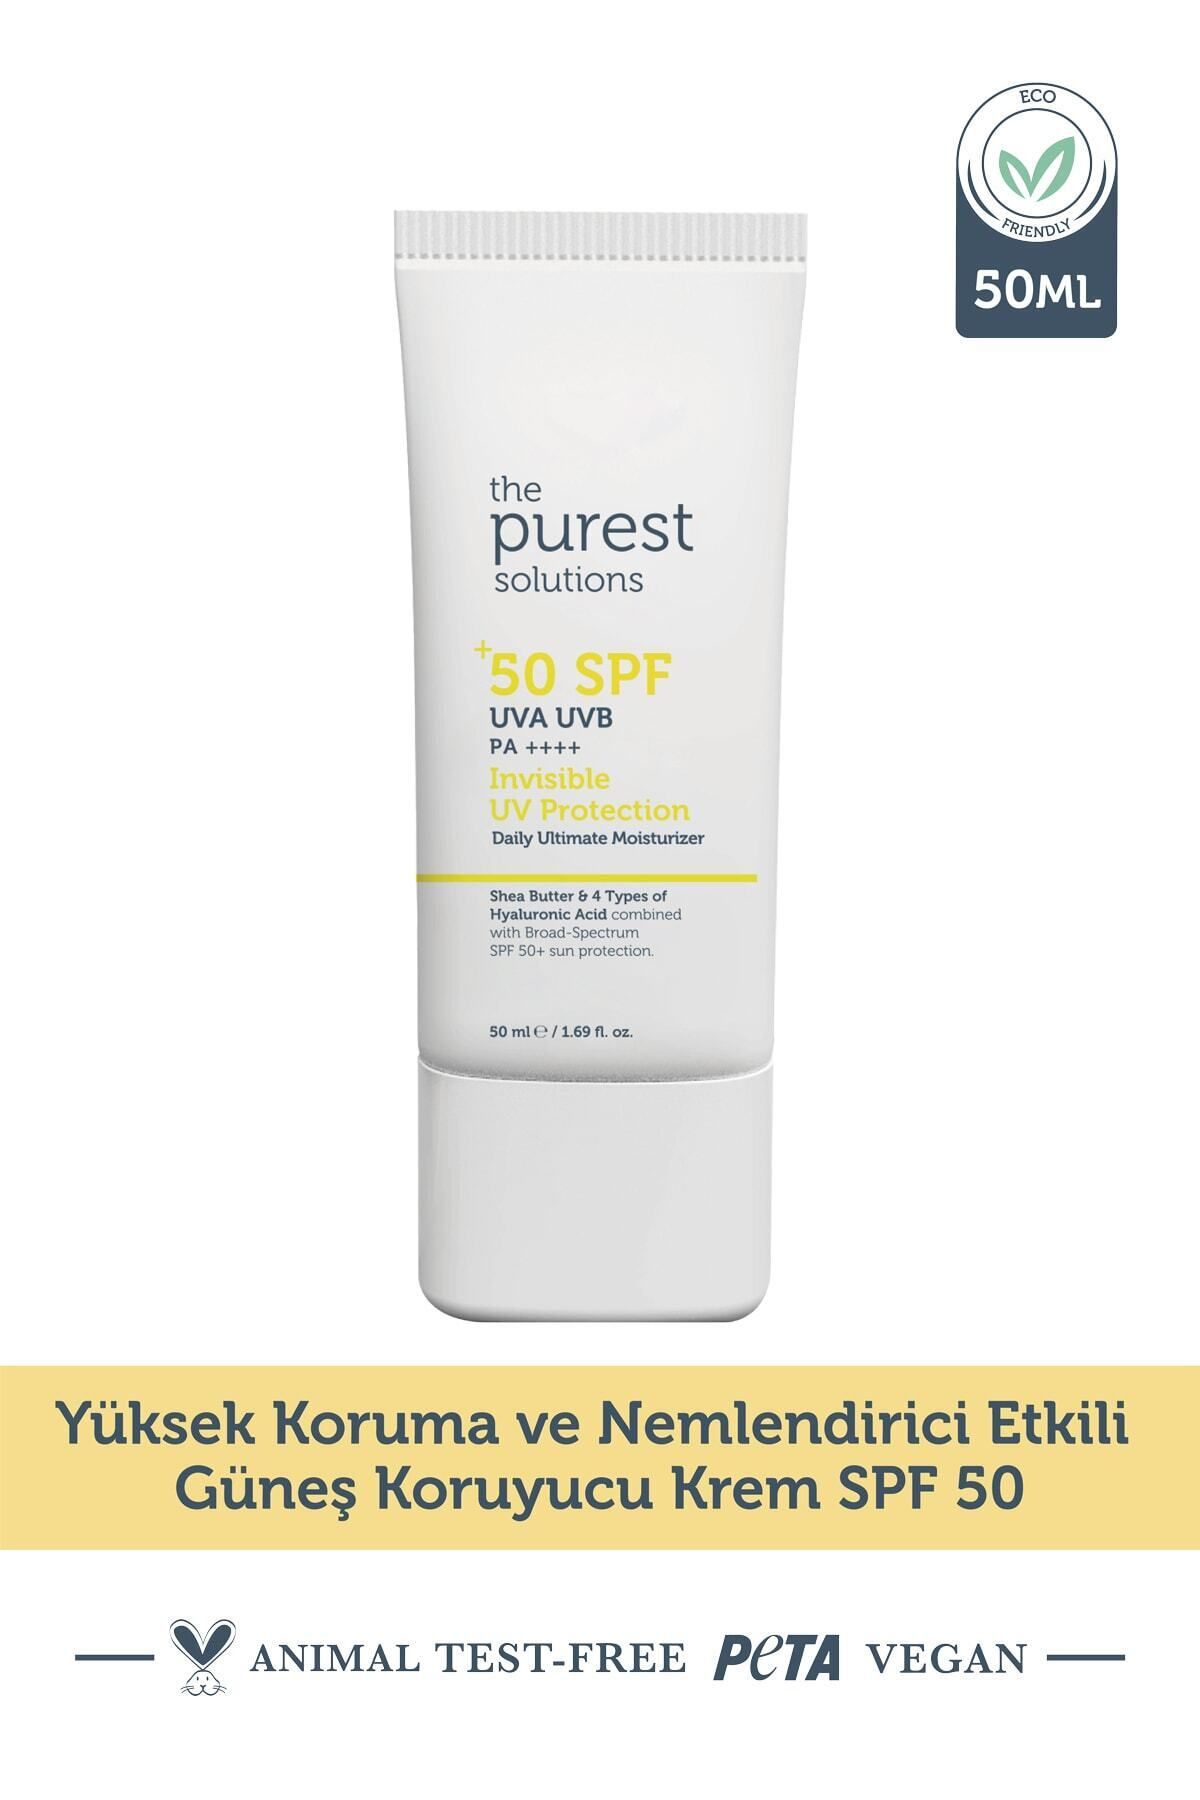 The Purest Solutions HİGH PROTECTİON AND MOİSTURİZİNG LONG-LASTİNG PROTECTİVE CREAM SPF 50, 50 ML DEMBA4012